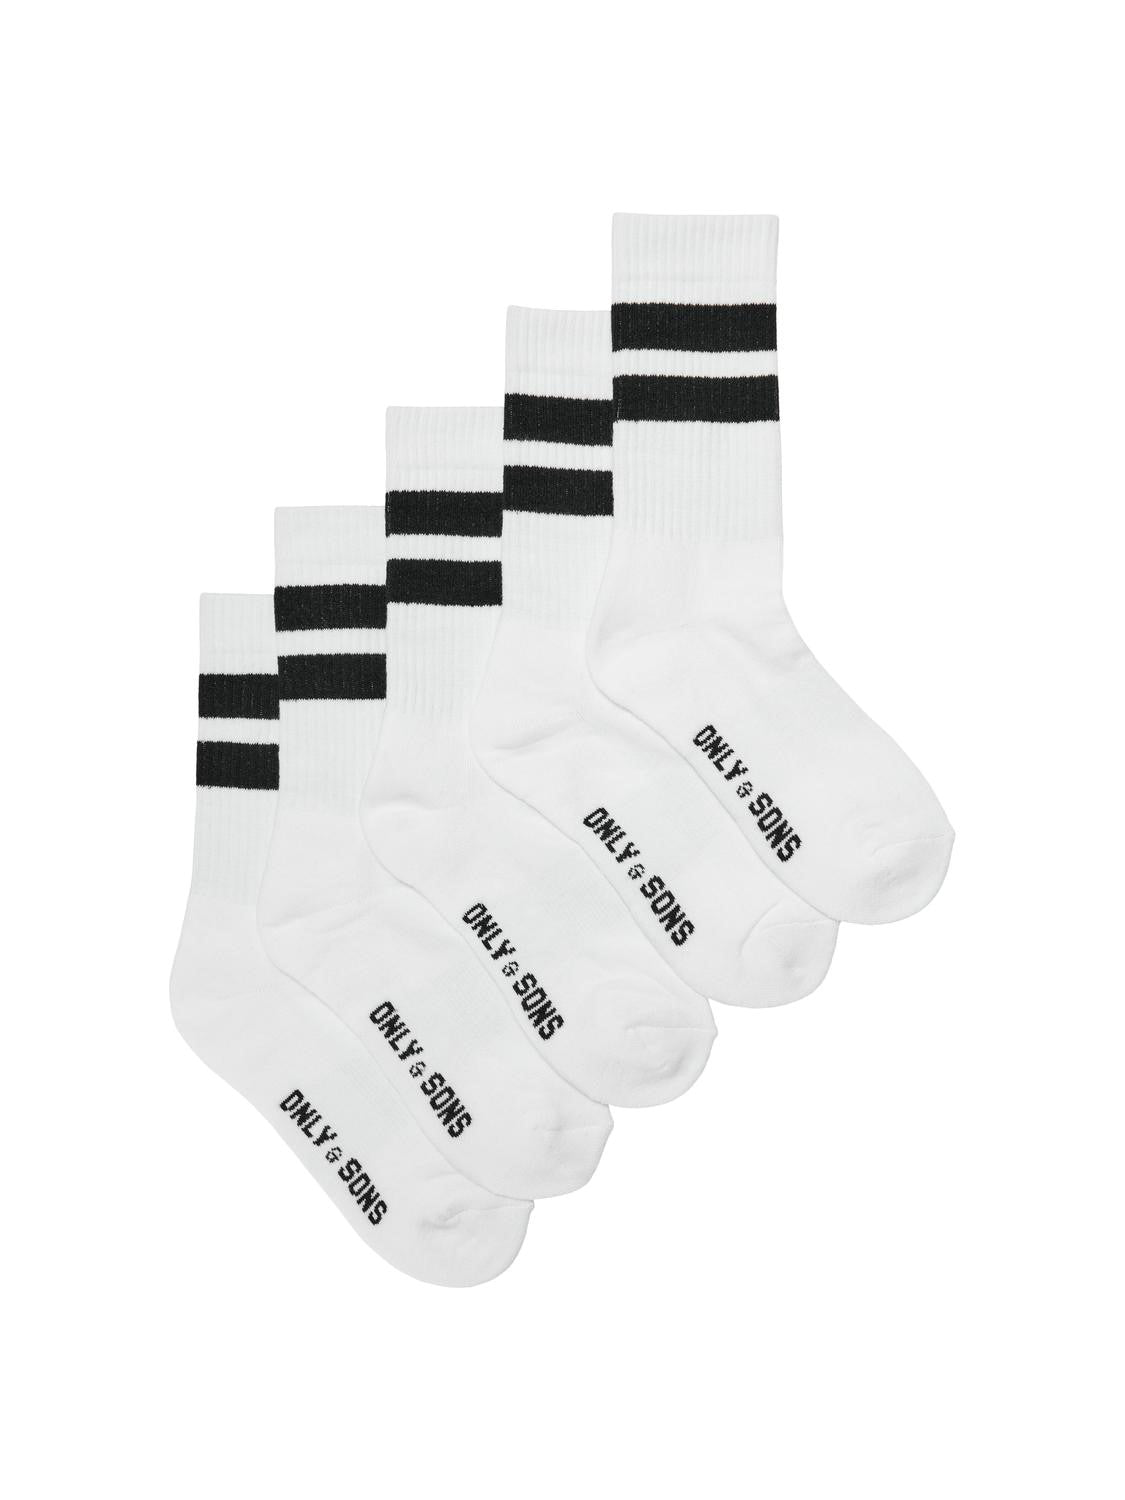 ONLY & SONS 5 PACK TENNIS SOCK - WHITE